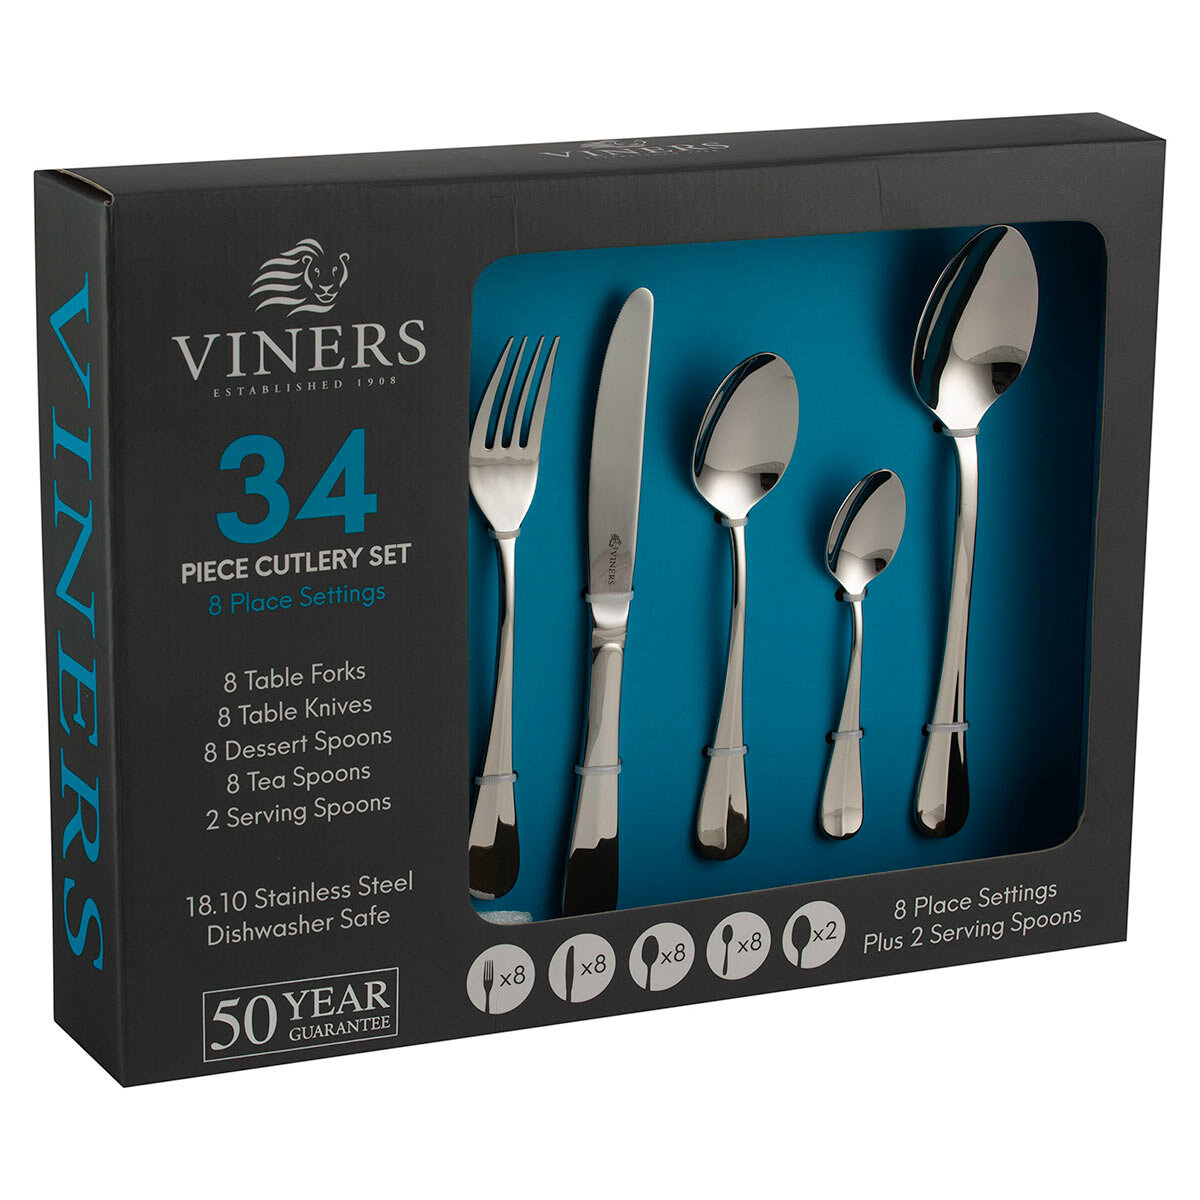 Viners Stainless Steel Cutlery Set, 34 Pieces